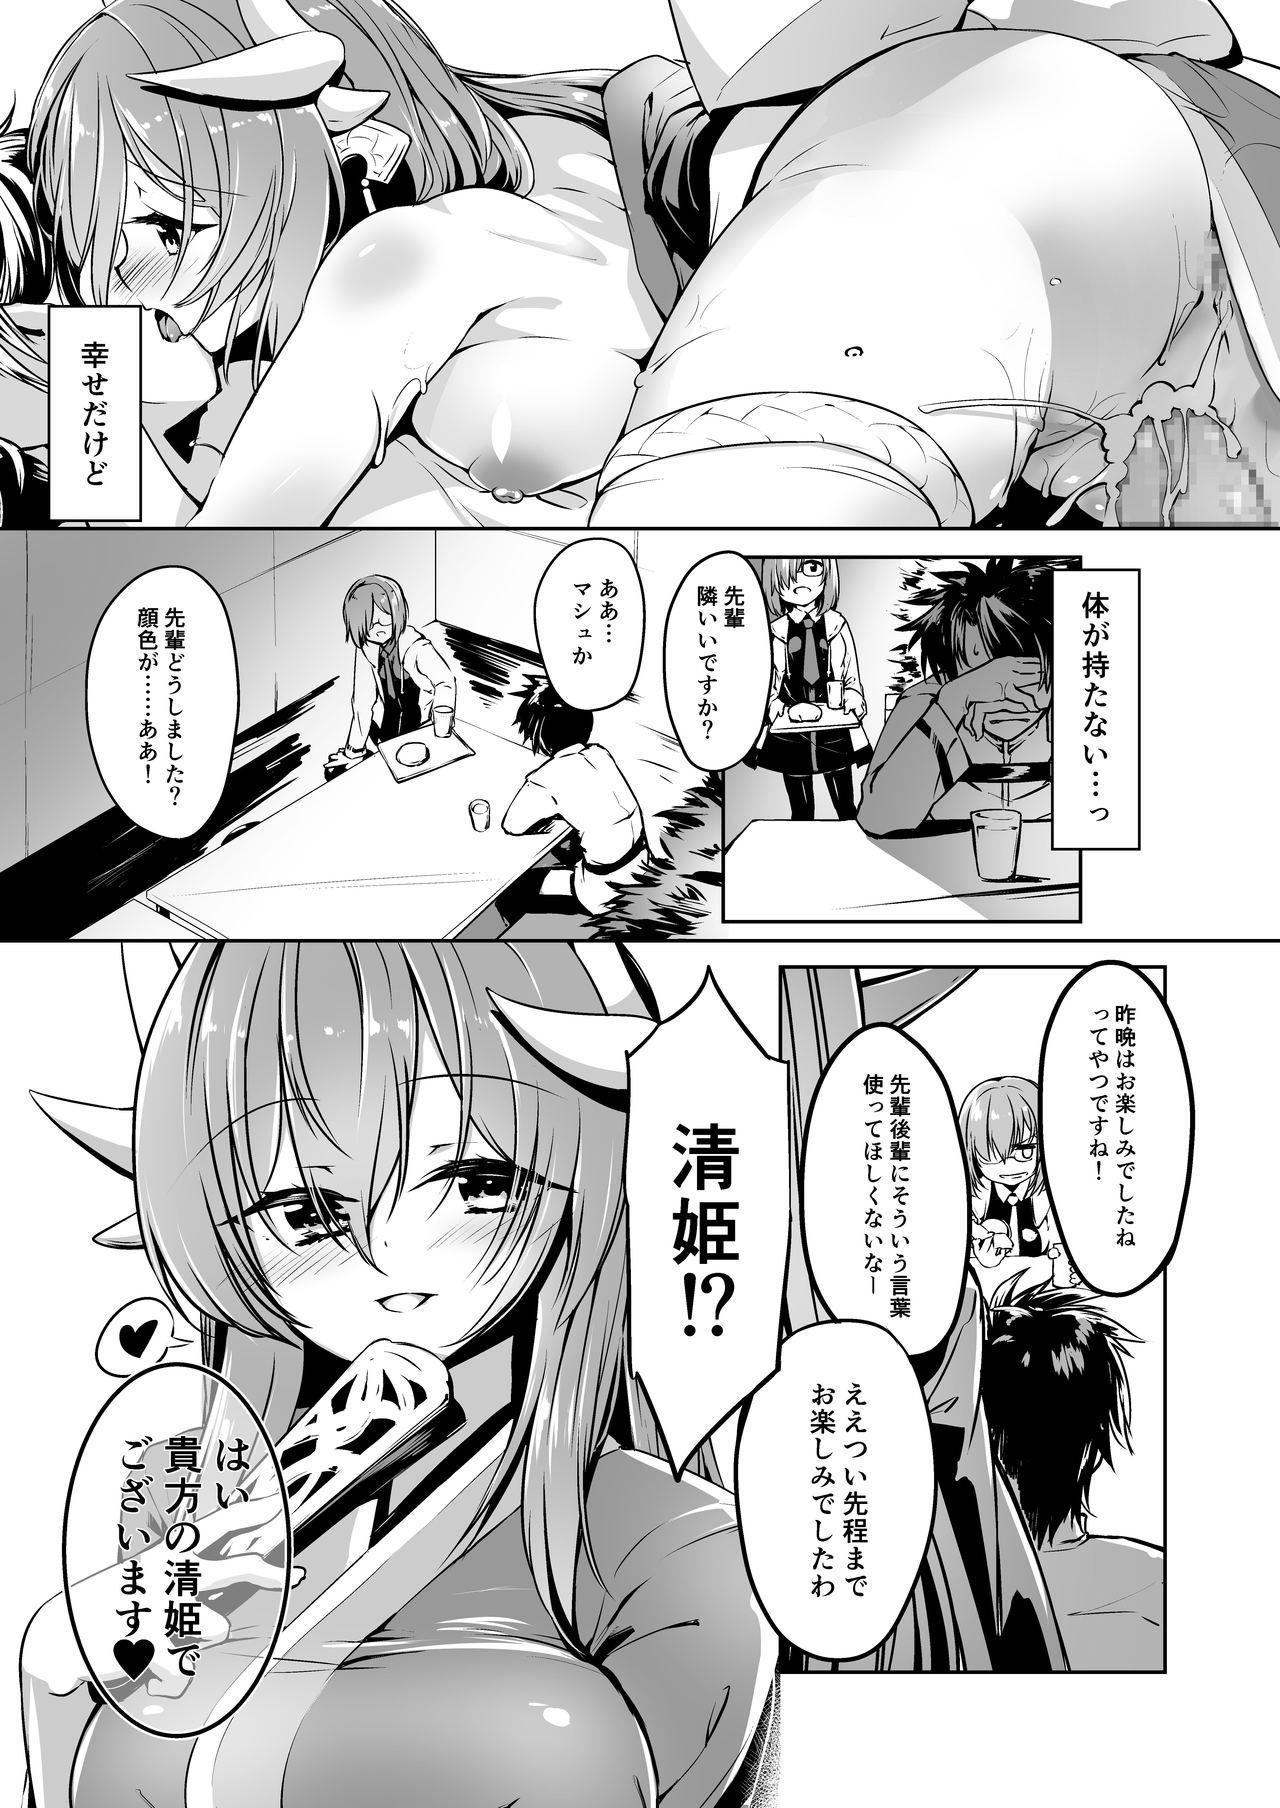 Tinder Kiyohime Lovers vol. 02 - Fate grand order Old - Page 6